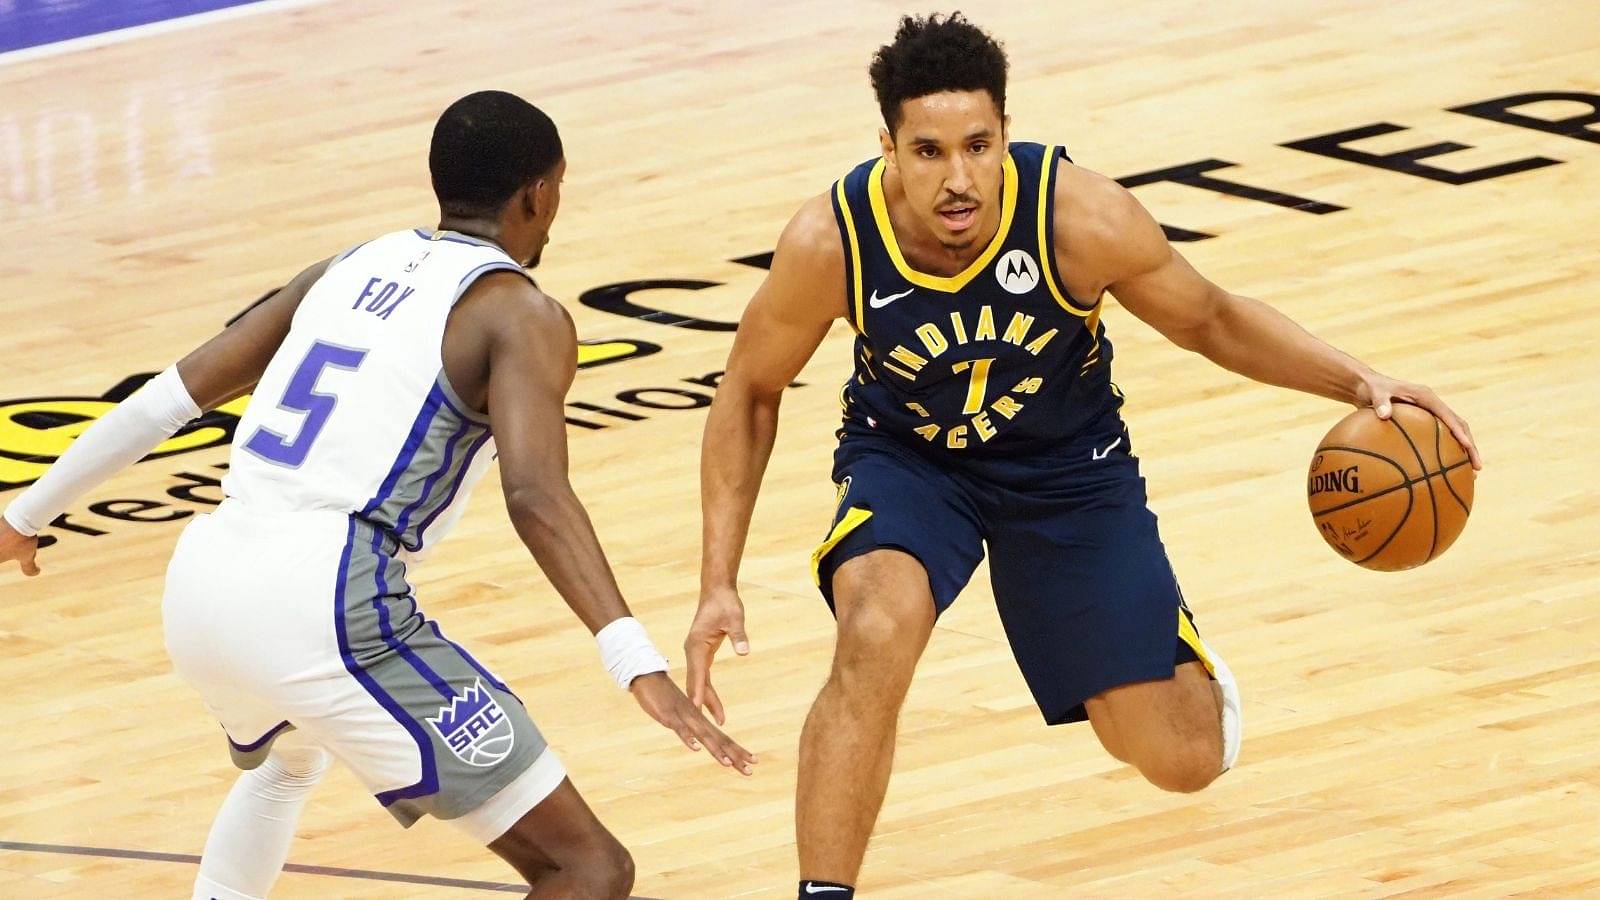 "Malcolm Brogdon went to Poland once and now wants play for them?!": Paperwork in order for the Indiana Pacers guard to play for the Poland national team this summer